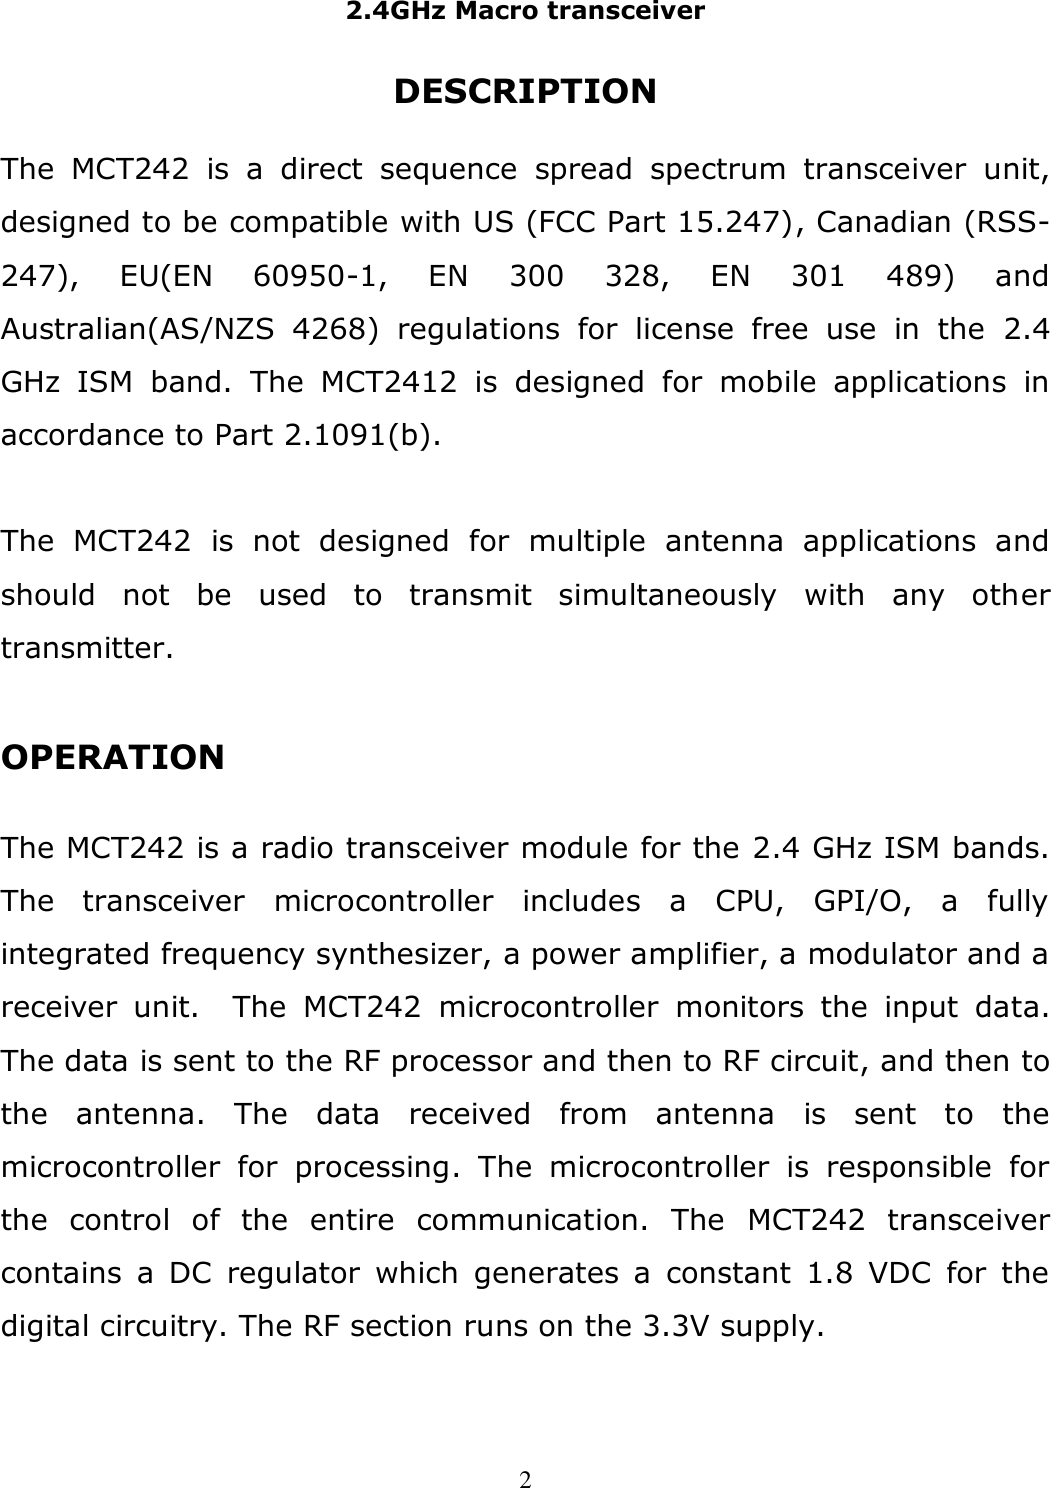 2.4GHz Macro transceiver   2 DESCRIPTION  The  MCT242  is  a  direct  sequence  spread  spectrum  transceiver  unit, designed to be compatible with US (FCC Part 15.247), Canadian (RSS-247),  EU(EN  60950-1,  EN  300  328,  EN  301  489)  and Australian(AS/NZS  4268)  regulations  for  license  free  use  in  the  2.4 GHz  ISM  band.  The  MCT2412  is  designed  for  mobile  applications  in accordance to Part 2.1091(b).  The  MCT242  is  not  designed  for  multiple  antenna  applications  and should  not  be  used  to  transmit  simultaneously  with  any  other transmitter.  OPERATION  The MCT242 is a radio transceiver module for the 2.4 GHz ISM bands. The  transceiver  microcontroller  includes  a  CPU,  GPI/O,  a  fully integrated frequency synthesizer, a power amplifier, a modulator and a receiver  unit.    The  MCT242  microcontroller  monitors  the  input  data.  The data is sent to the RF processor and then to RF circuit, and then to the  antenna.  The  data  received  from  antenna  is  sent  to  the microcontroller  for  processing.  The  microcontroller  is  responsible  for the  control  of  the  entire  communication.  The  MCT242  transceiver contains a  DC  regulator  which  generates  a  constant  1.8  VDC  for  the digital circuitry. The RF section runs on the 3.3V supply.  